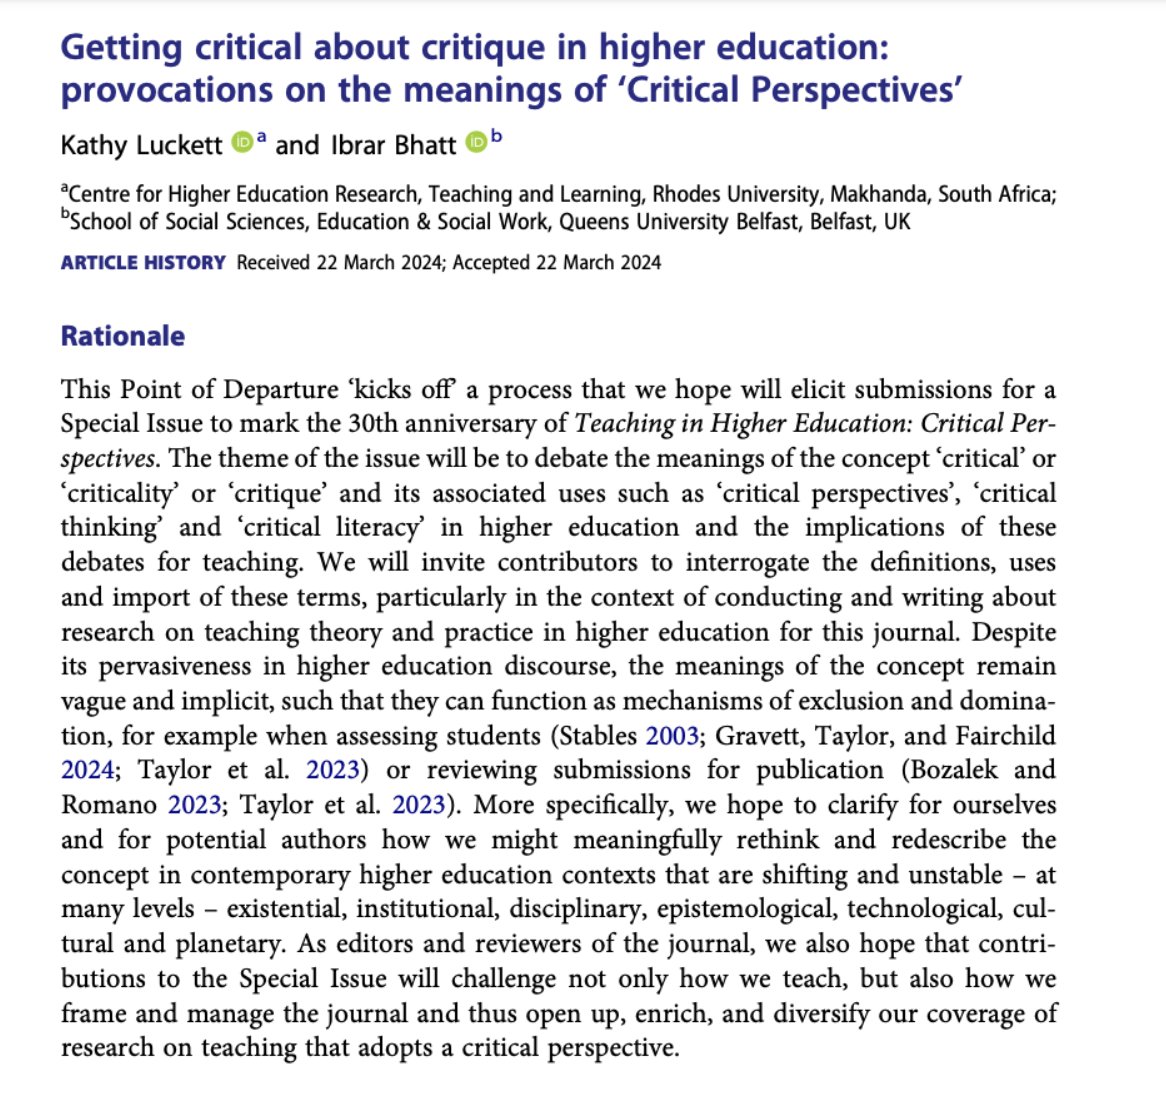 Here's the published version of a new article, Getting Critical about Critique. The work presents provocations to elicit responses for a novel SI of largely of multi-perspectival pieces to explore how concepts like Critique & Criticality are conceptualised doi.org/10.1080/135625…